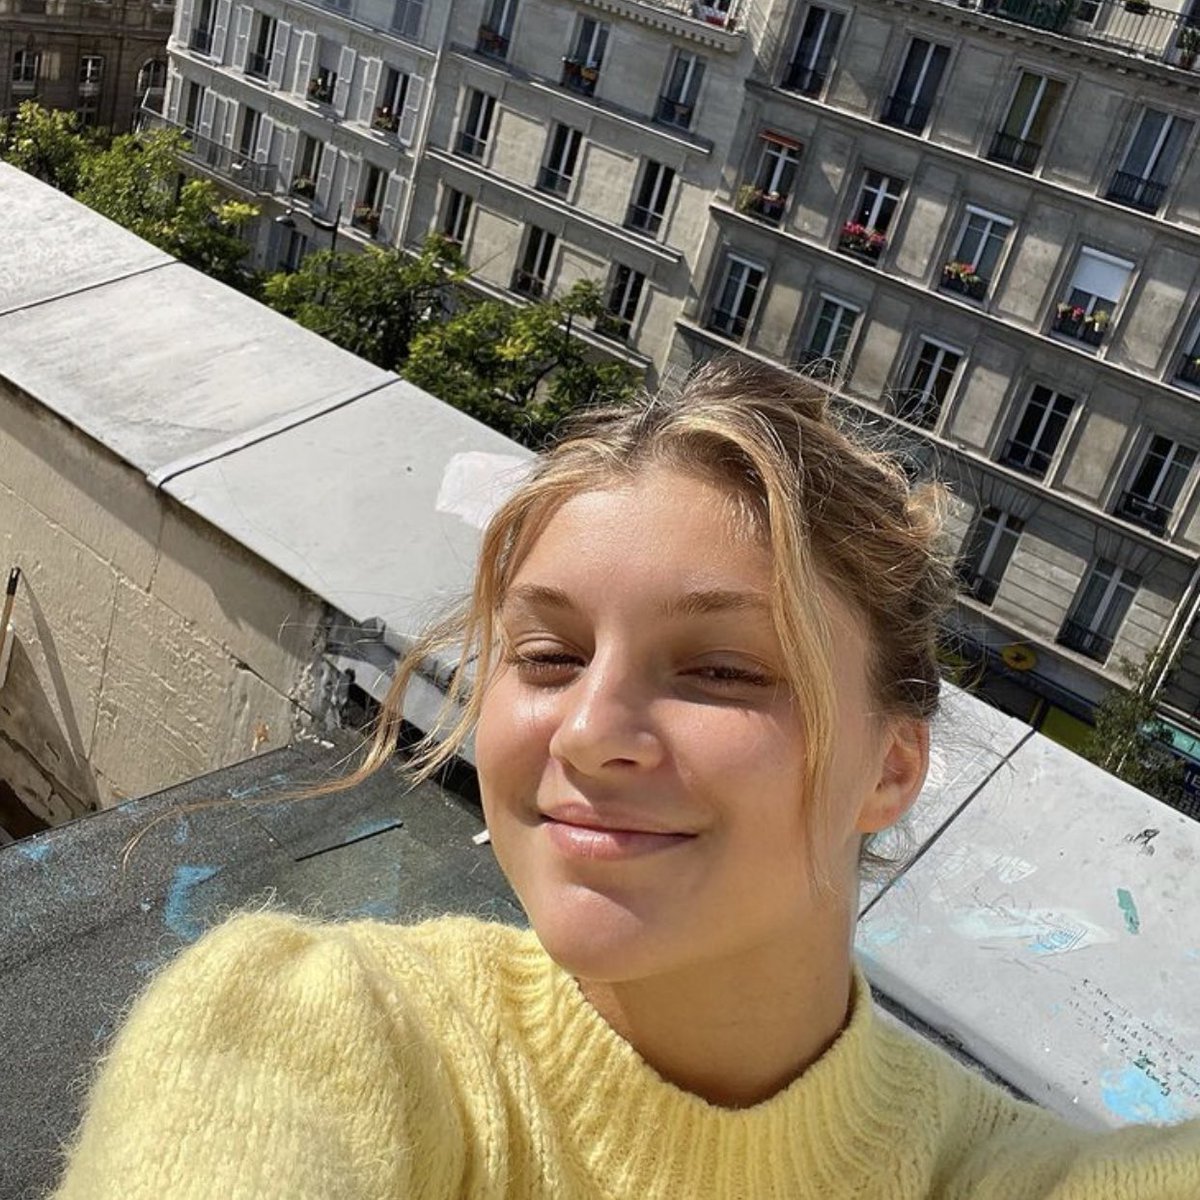 # viewfromthetop exactly what maya sees #skamfrance